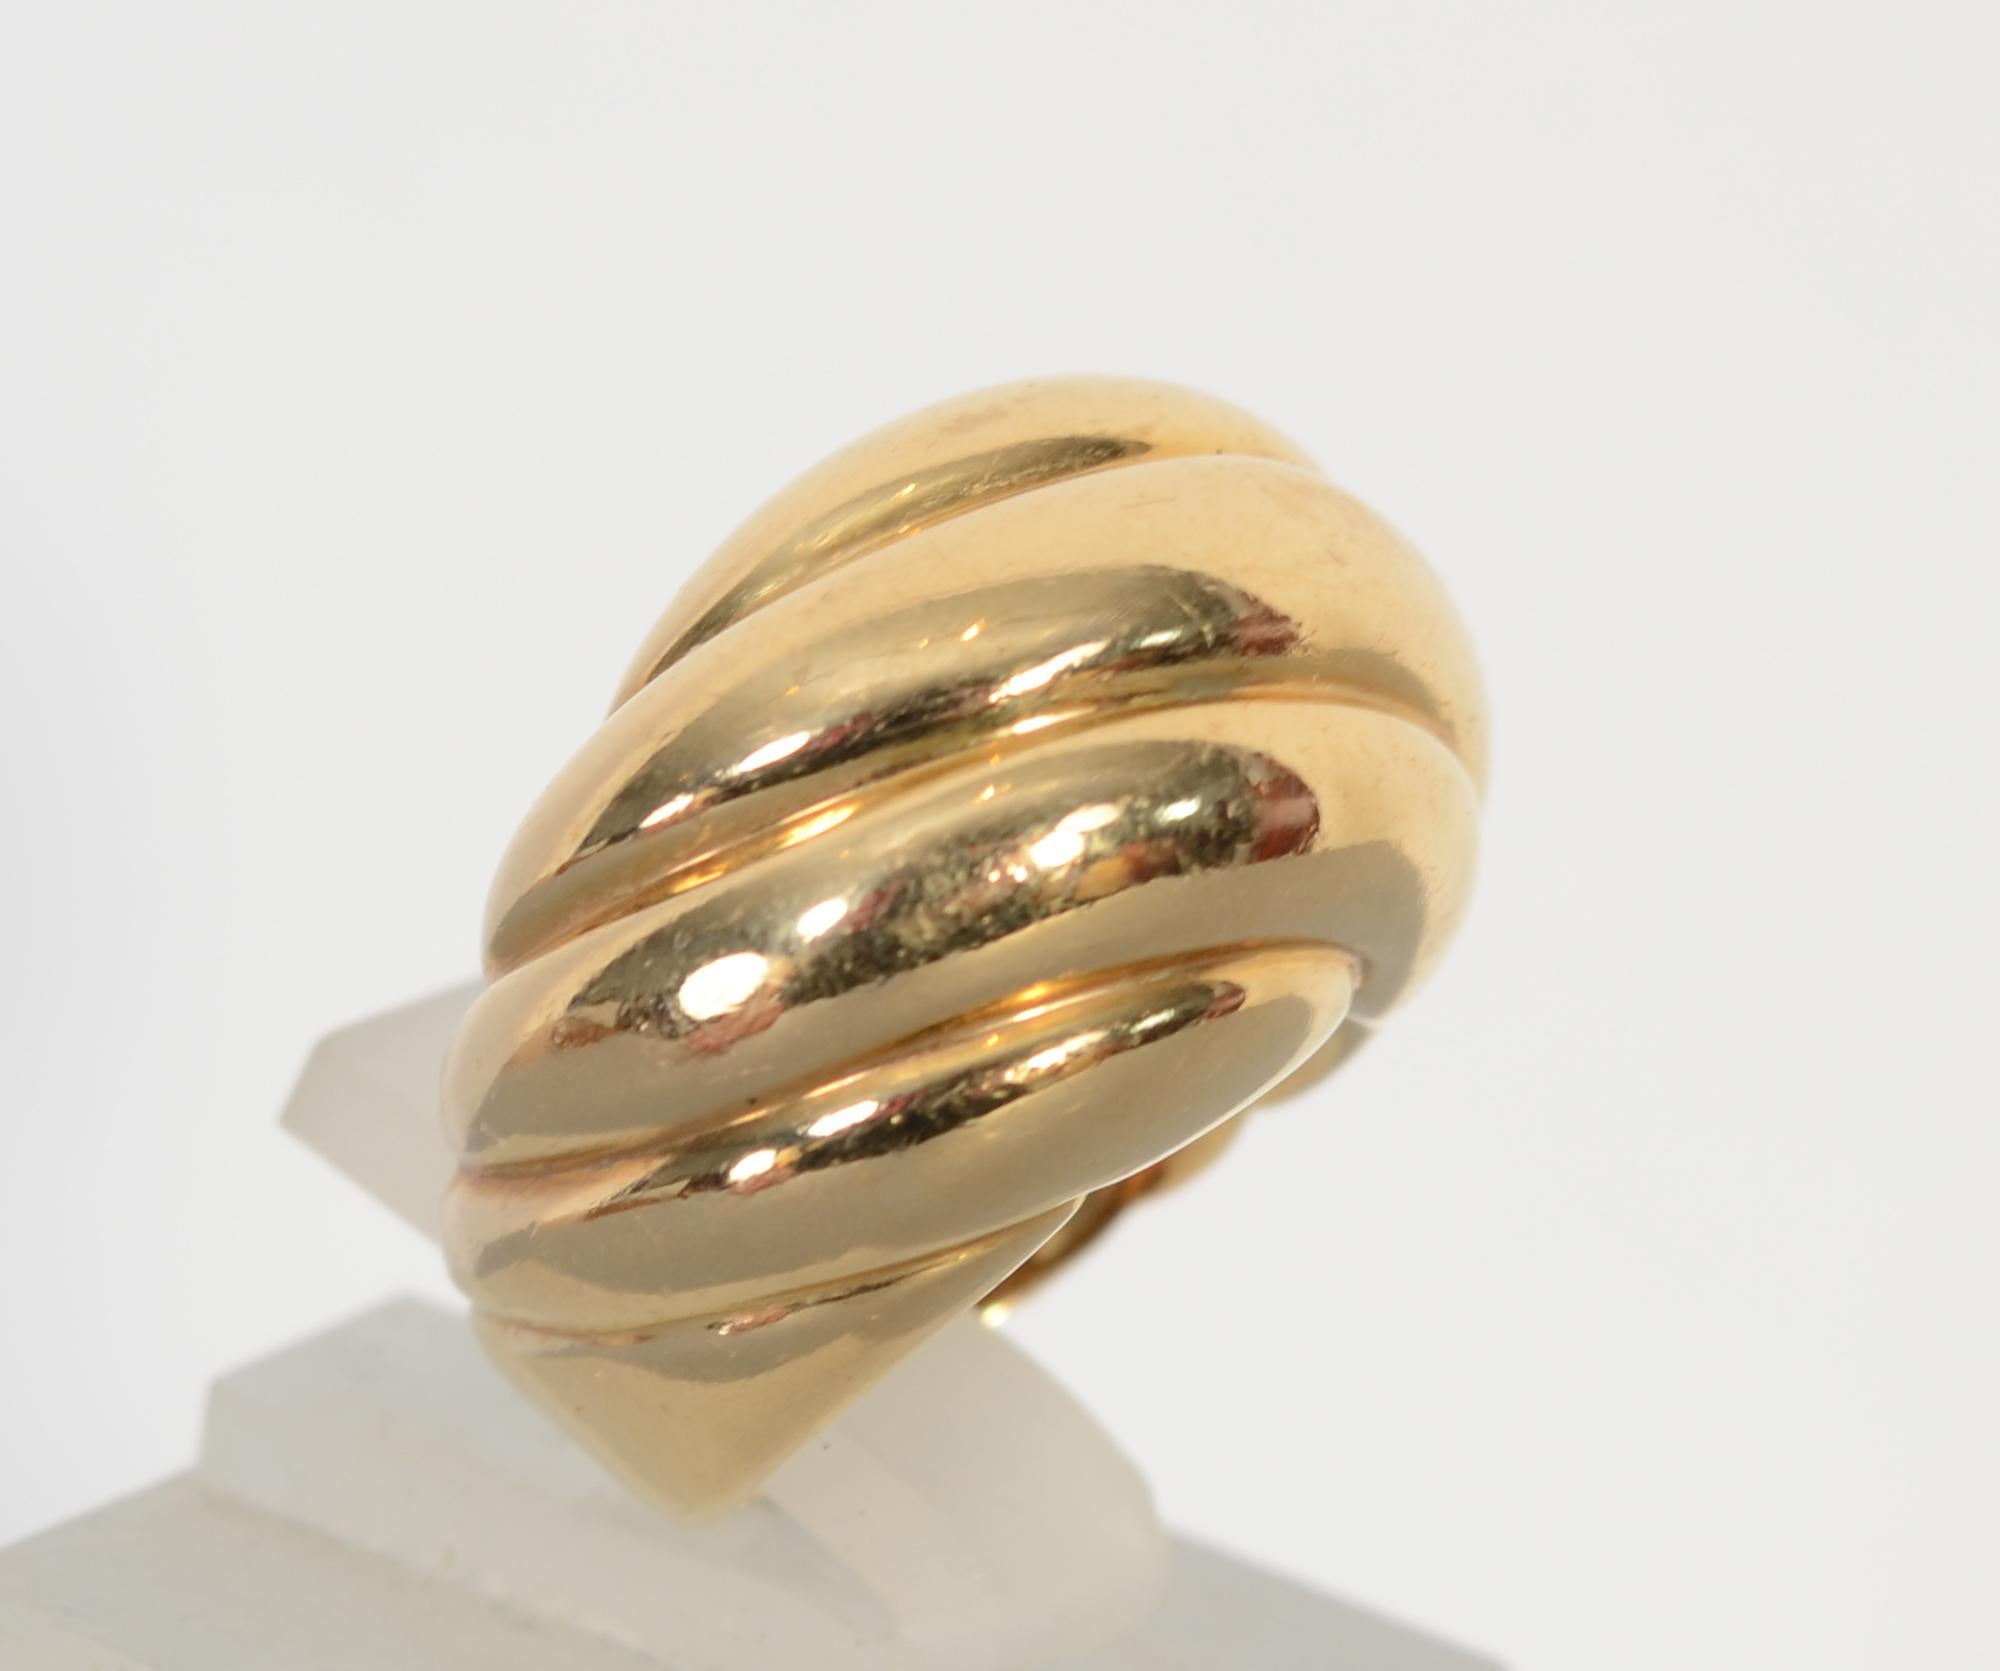 Tiffany classic gold dome ring with the addition of a swirled design.
The dome is half an inch in height. The ring is size 4 3/4. It can easily be sized up or down. The ring measures 5/8